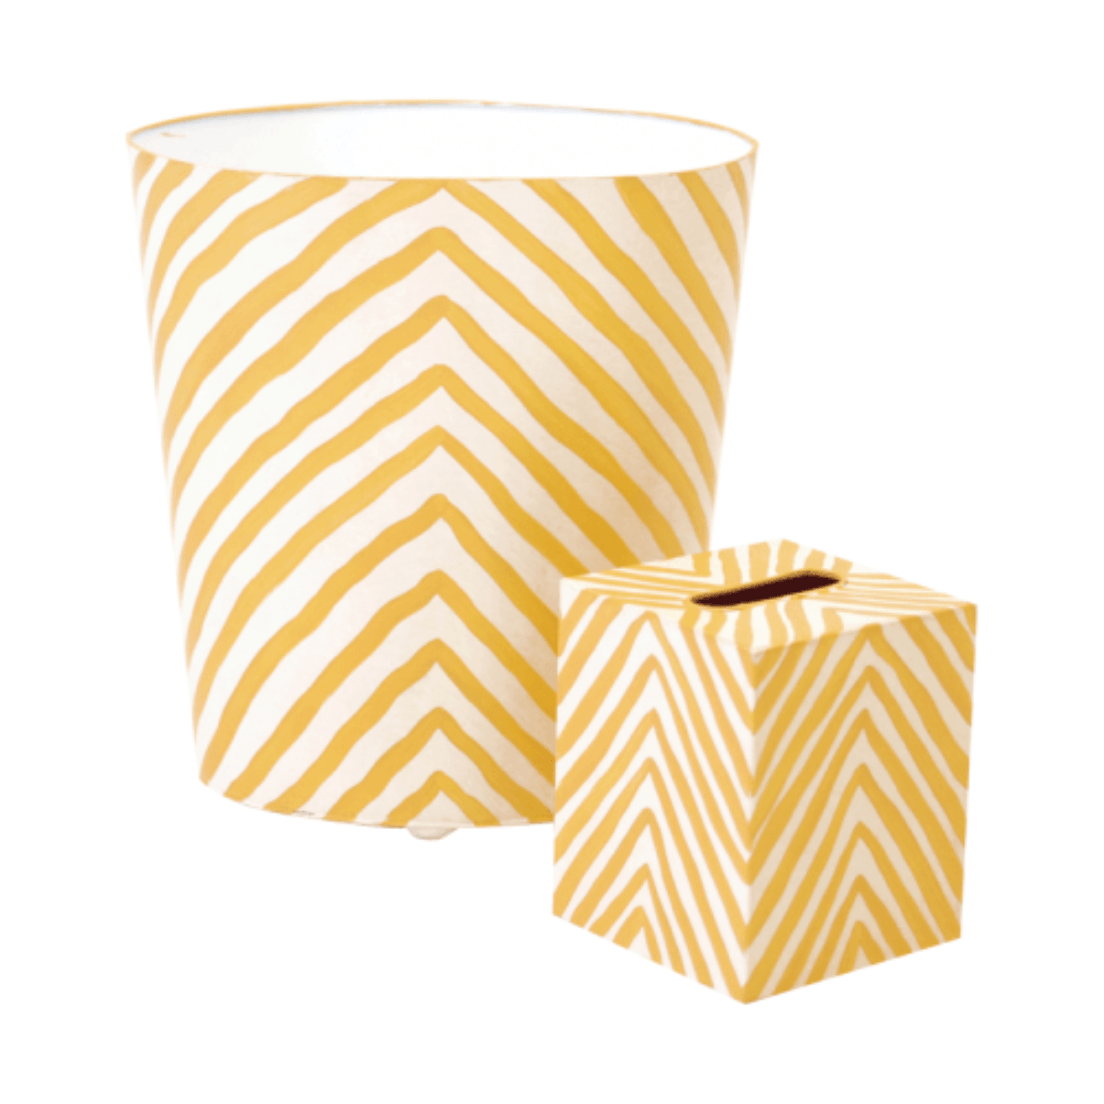 Zebra Oval Wastebasket and tissue box cover in Yellow - Bath Accessories at Fig Linens